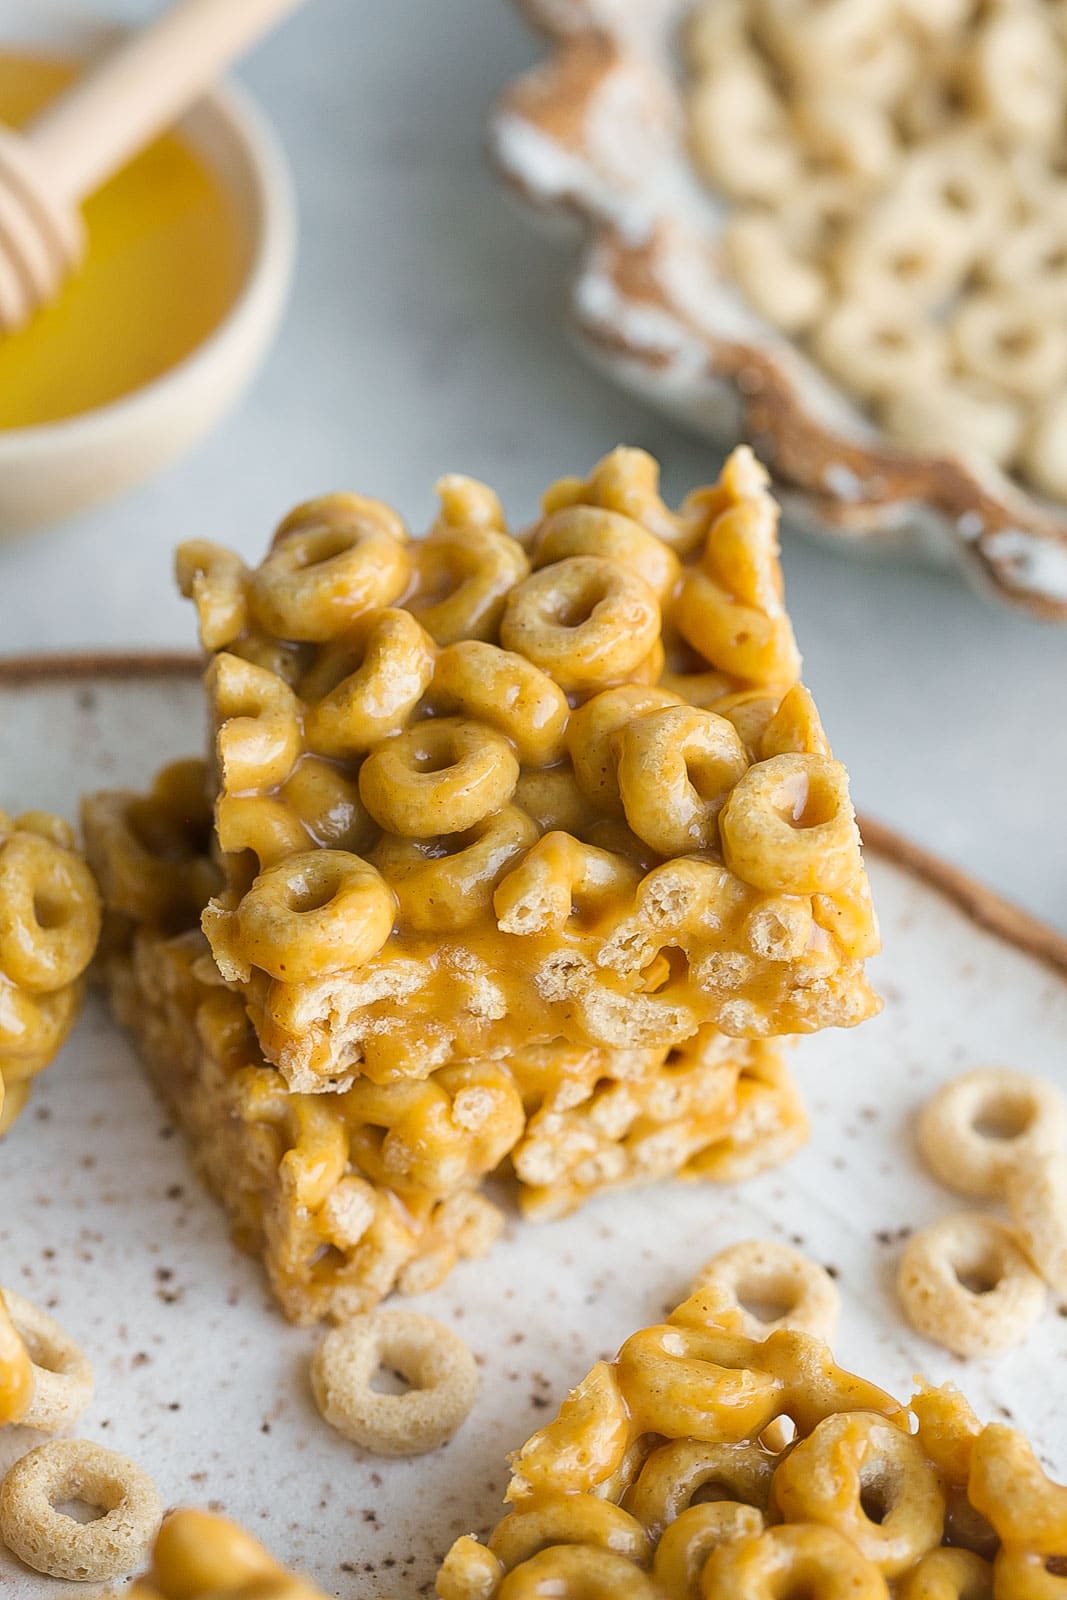 Peanut Butter Cheerio Bars stacked on plate.